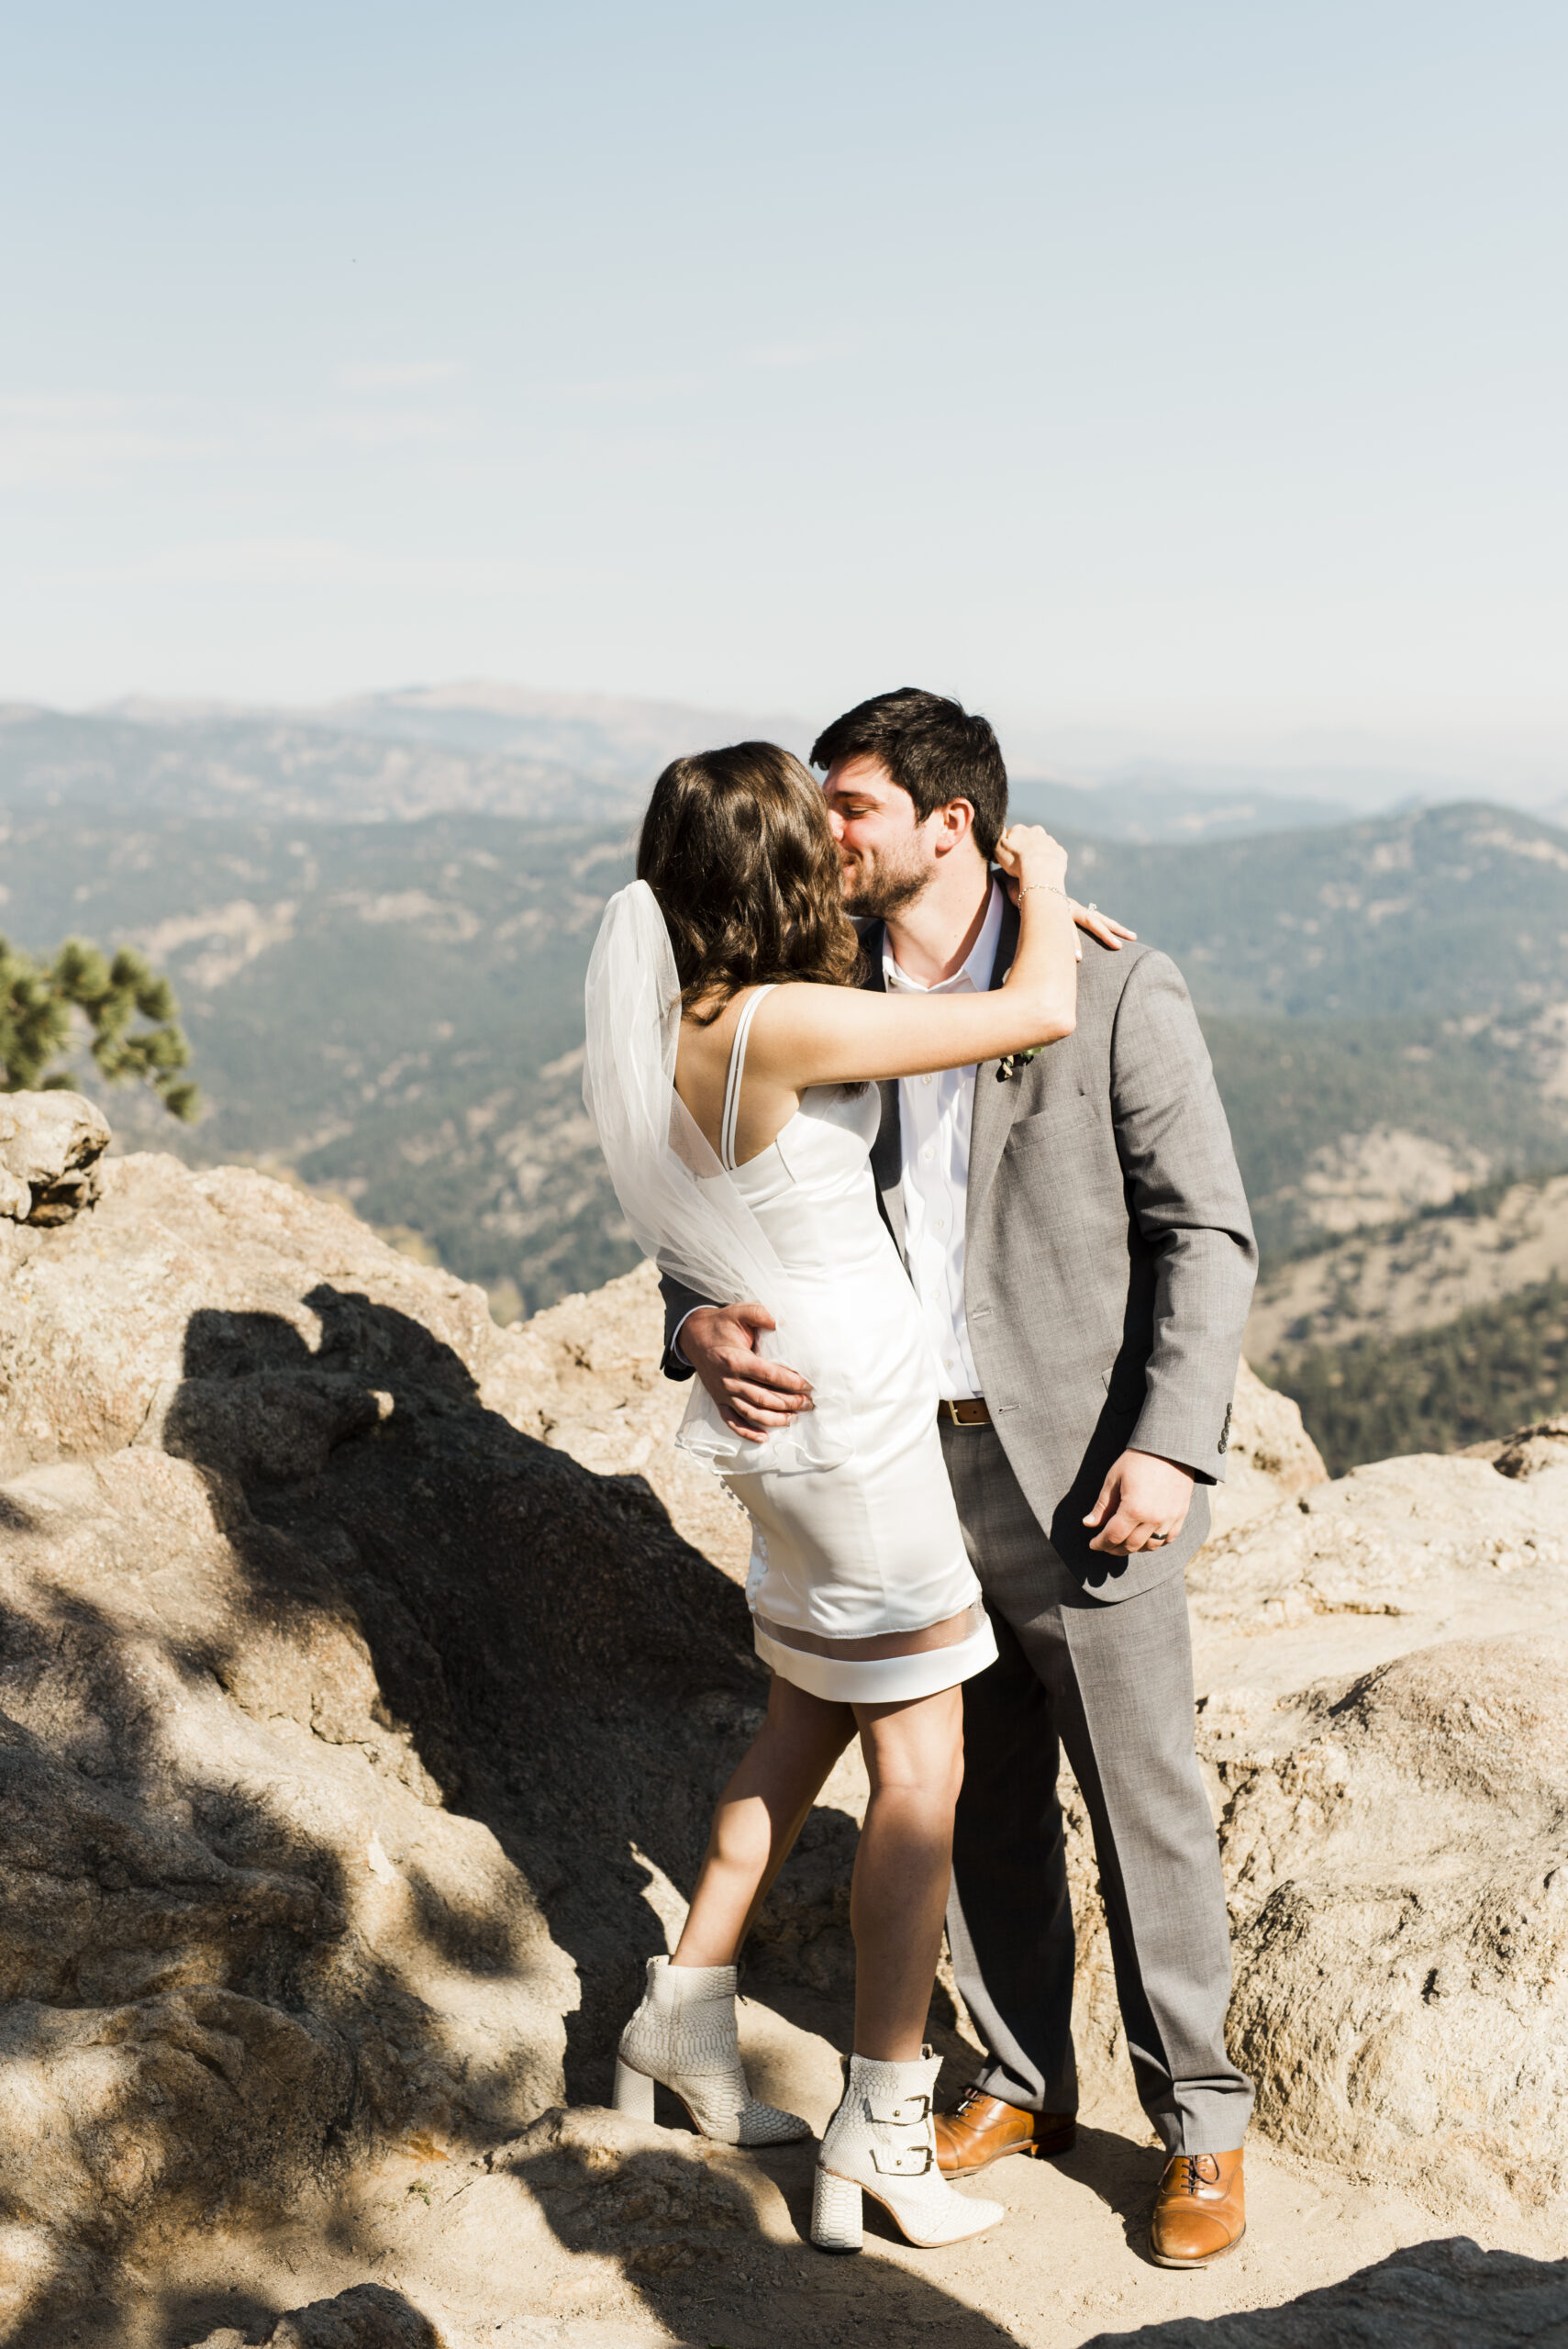 Flatirons Colorado Wedding with White Boots and Stunner Shades | Mountainside Bride